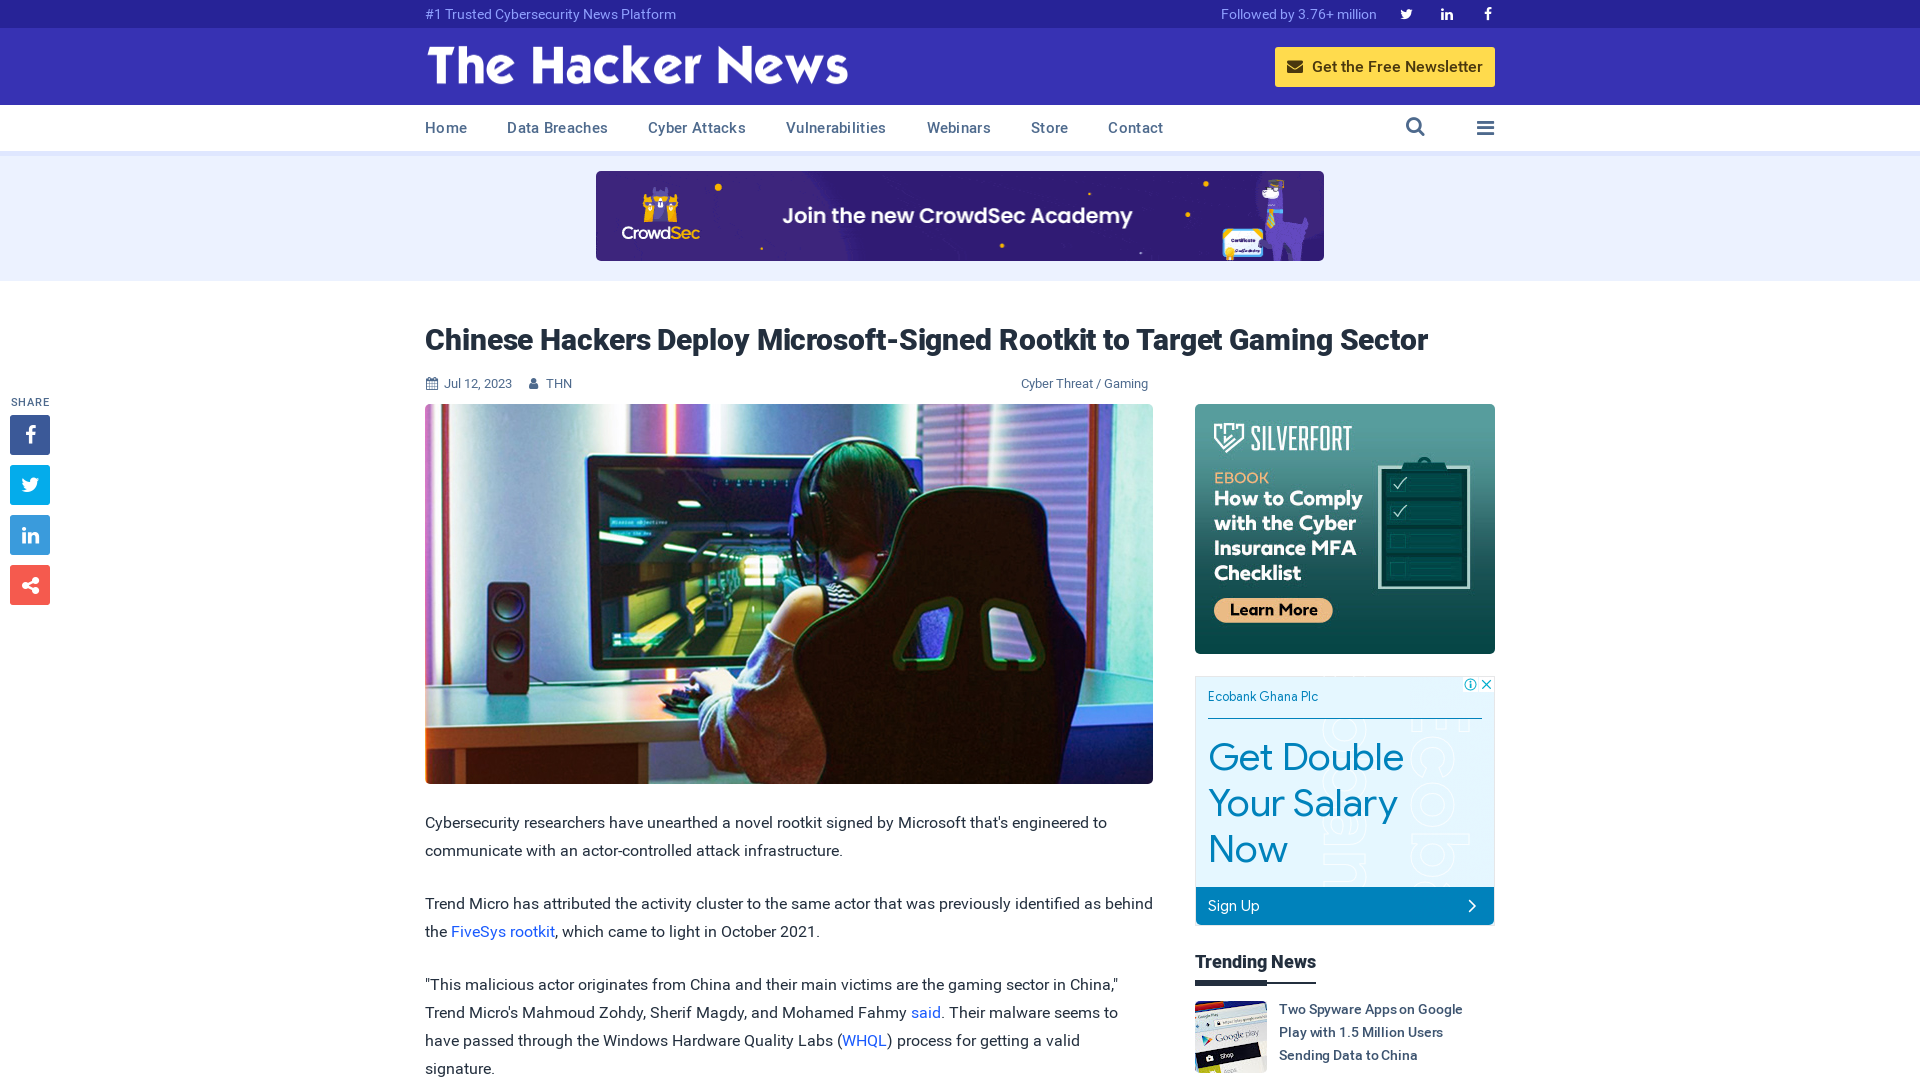 Chinese Hackers Deploy Microsoft-Signed Rootkit to Target Gaming Sector